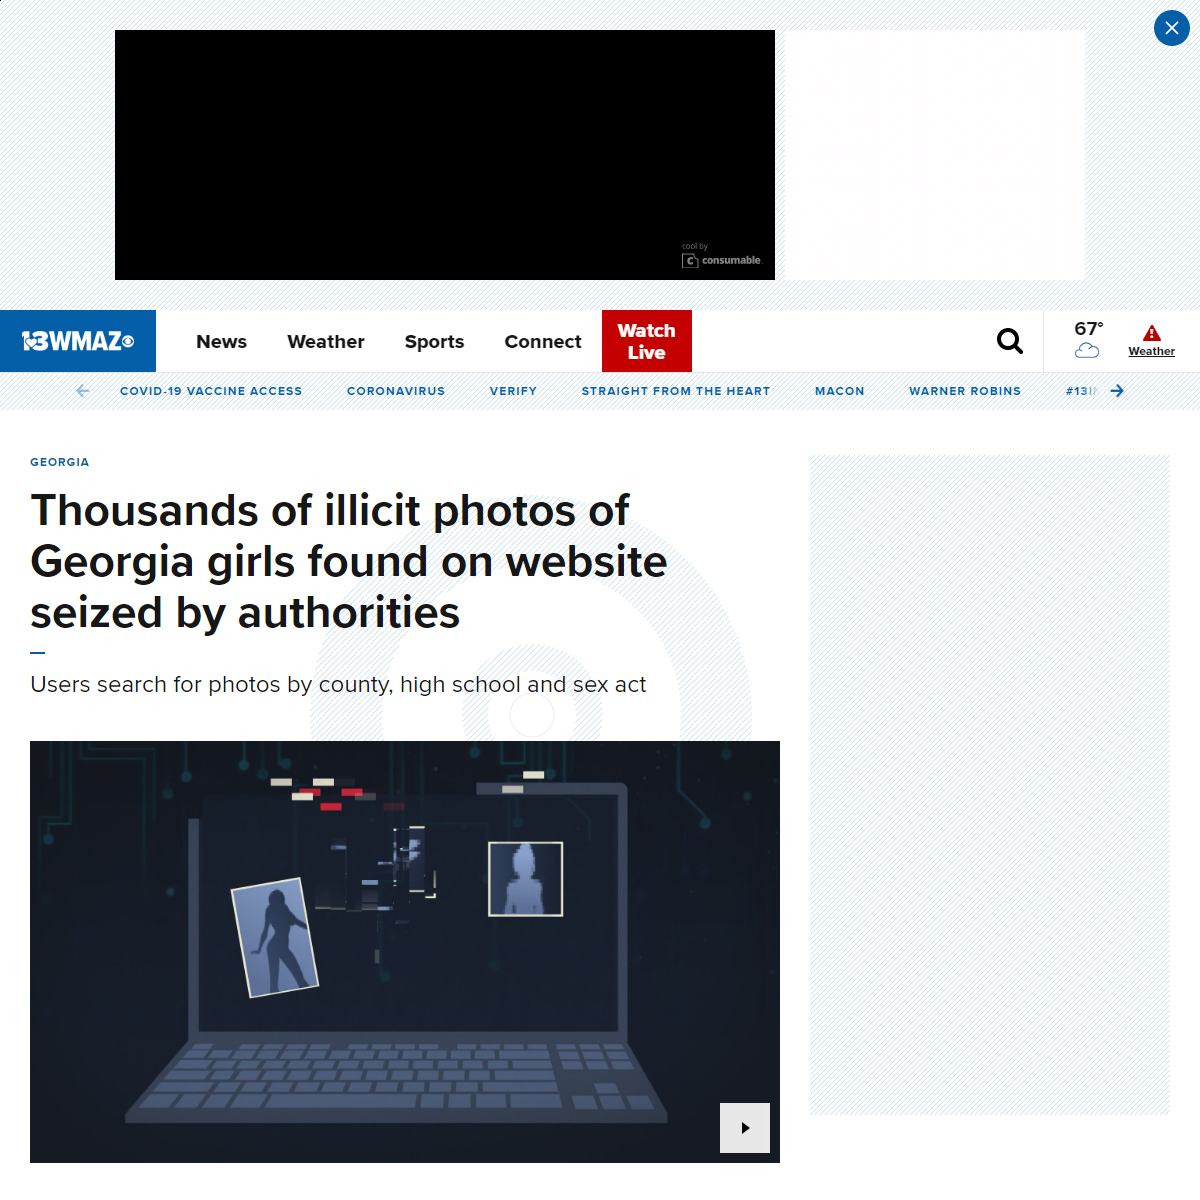 A complete backup of https://www.13wmaz.com/article/news/local/georgia/thousands-of-illicit-photos-of-georgia-girls-found-on-web